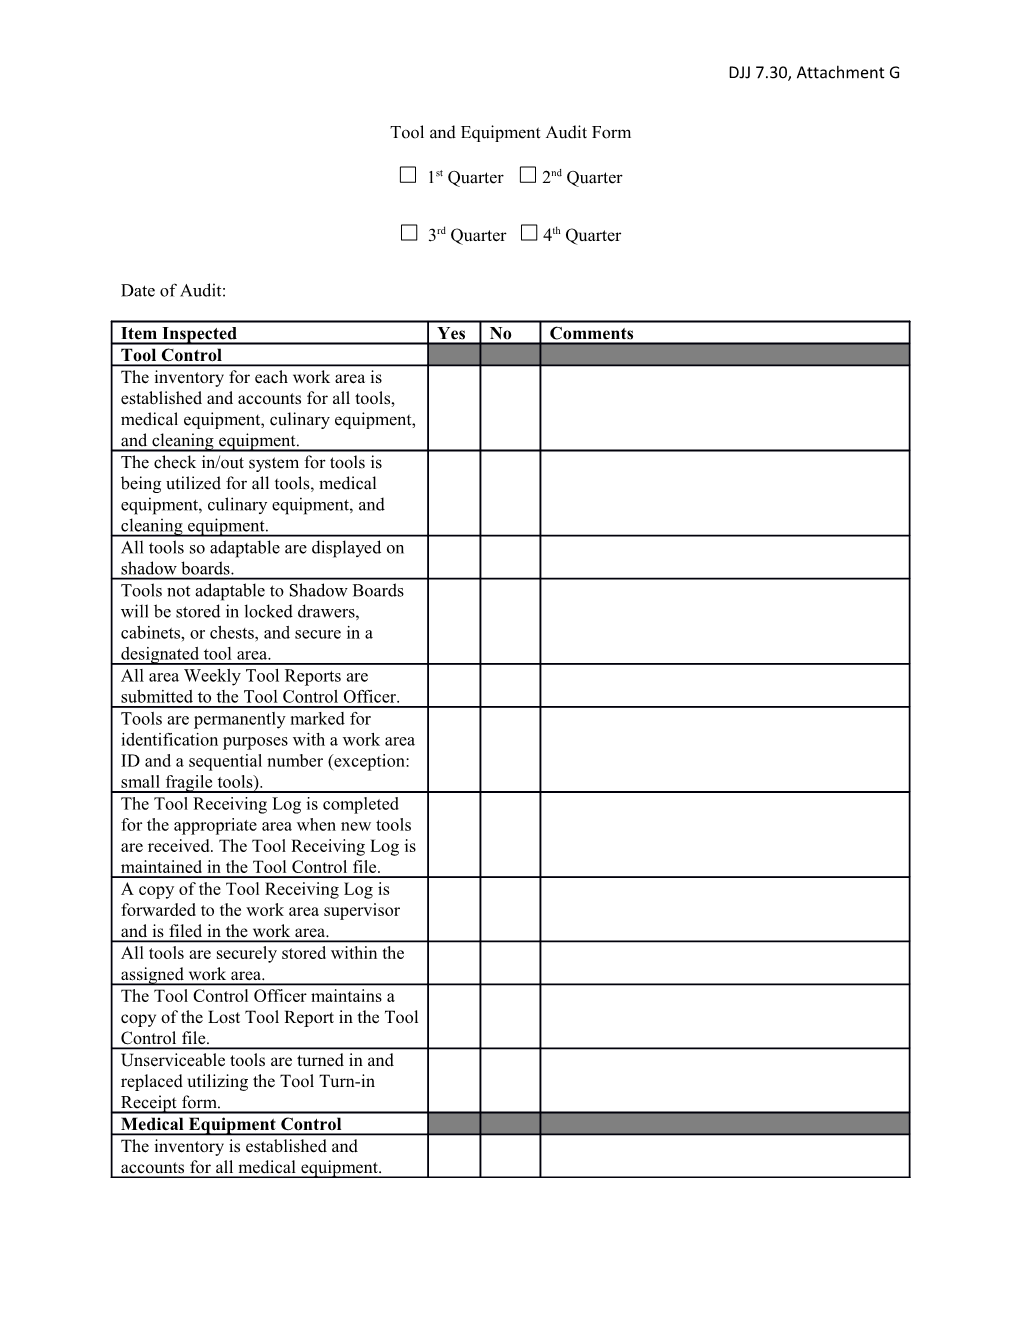 Tool and Equipment Audit Form